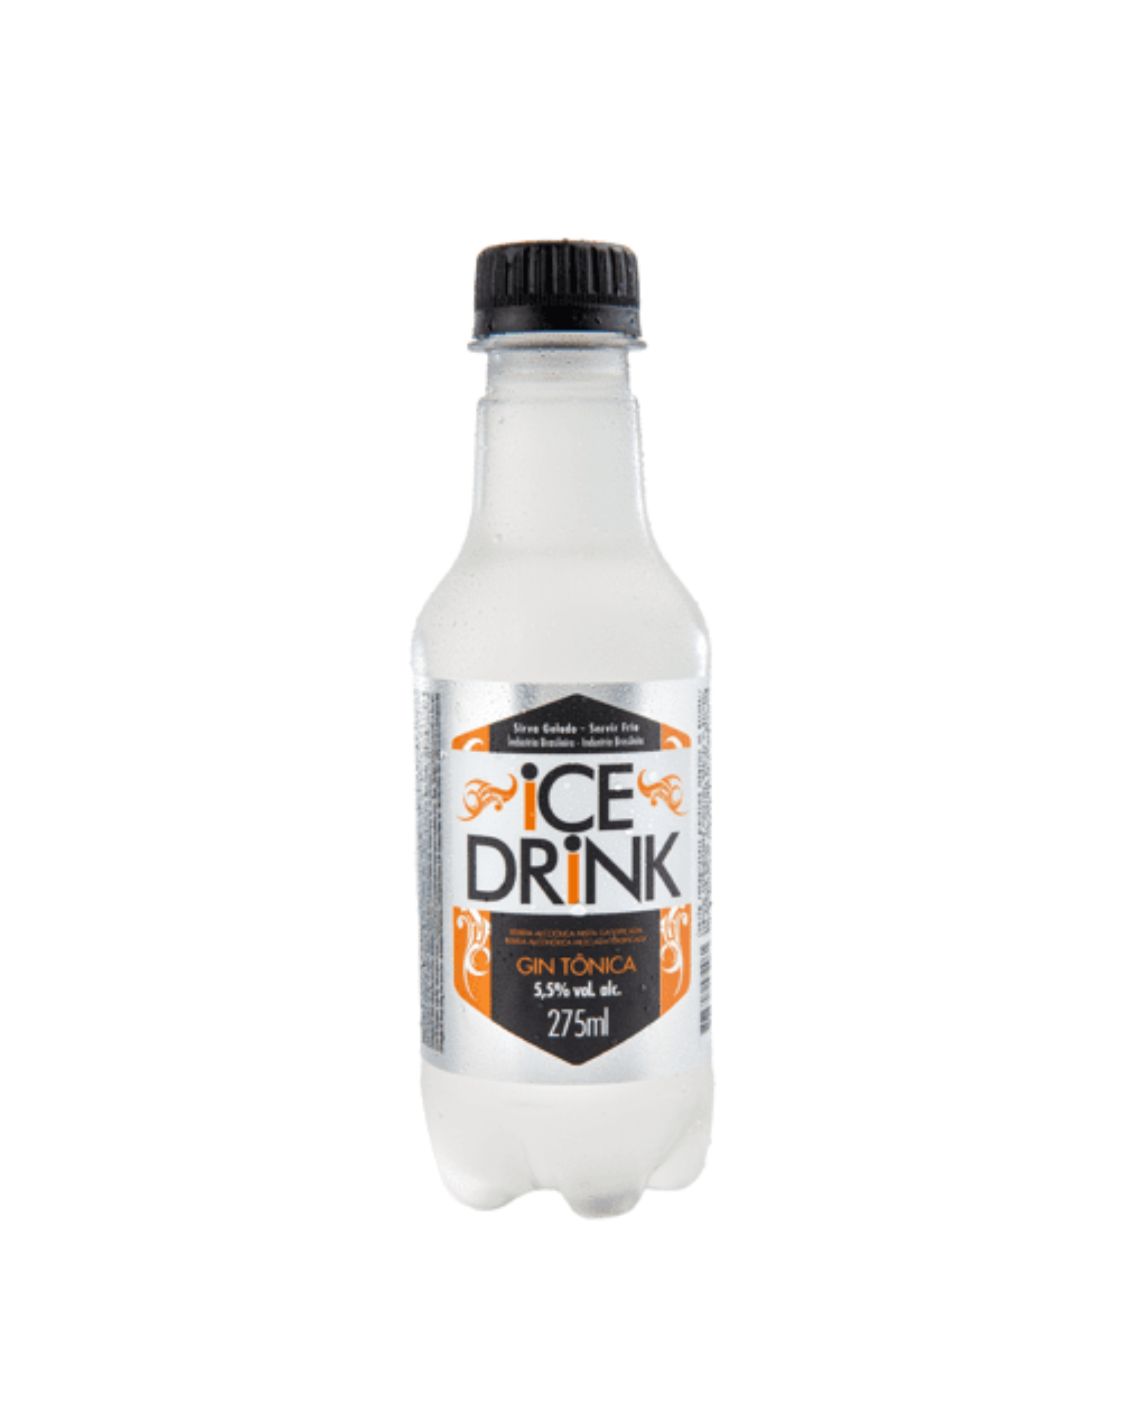 7898307572961 - ICE DRINK GIN TONICA PET 2